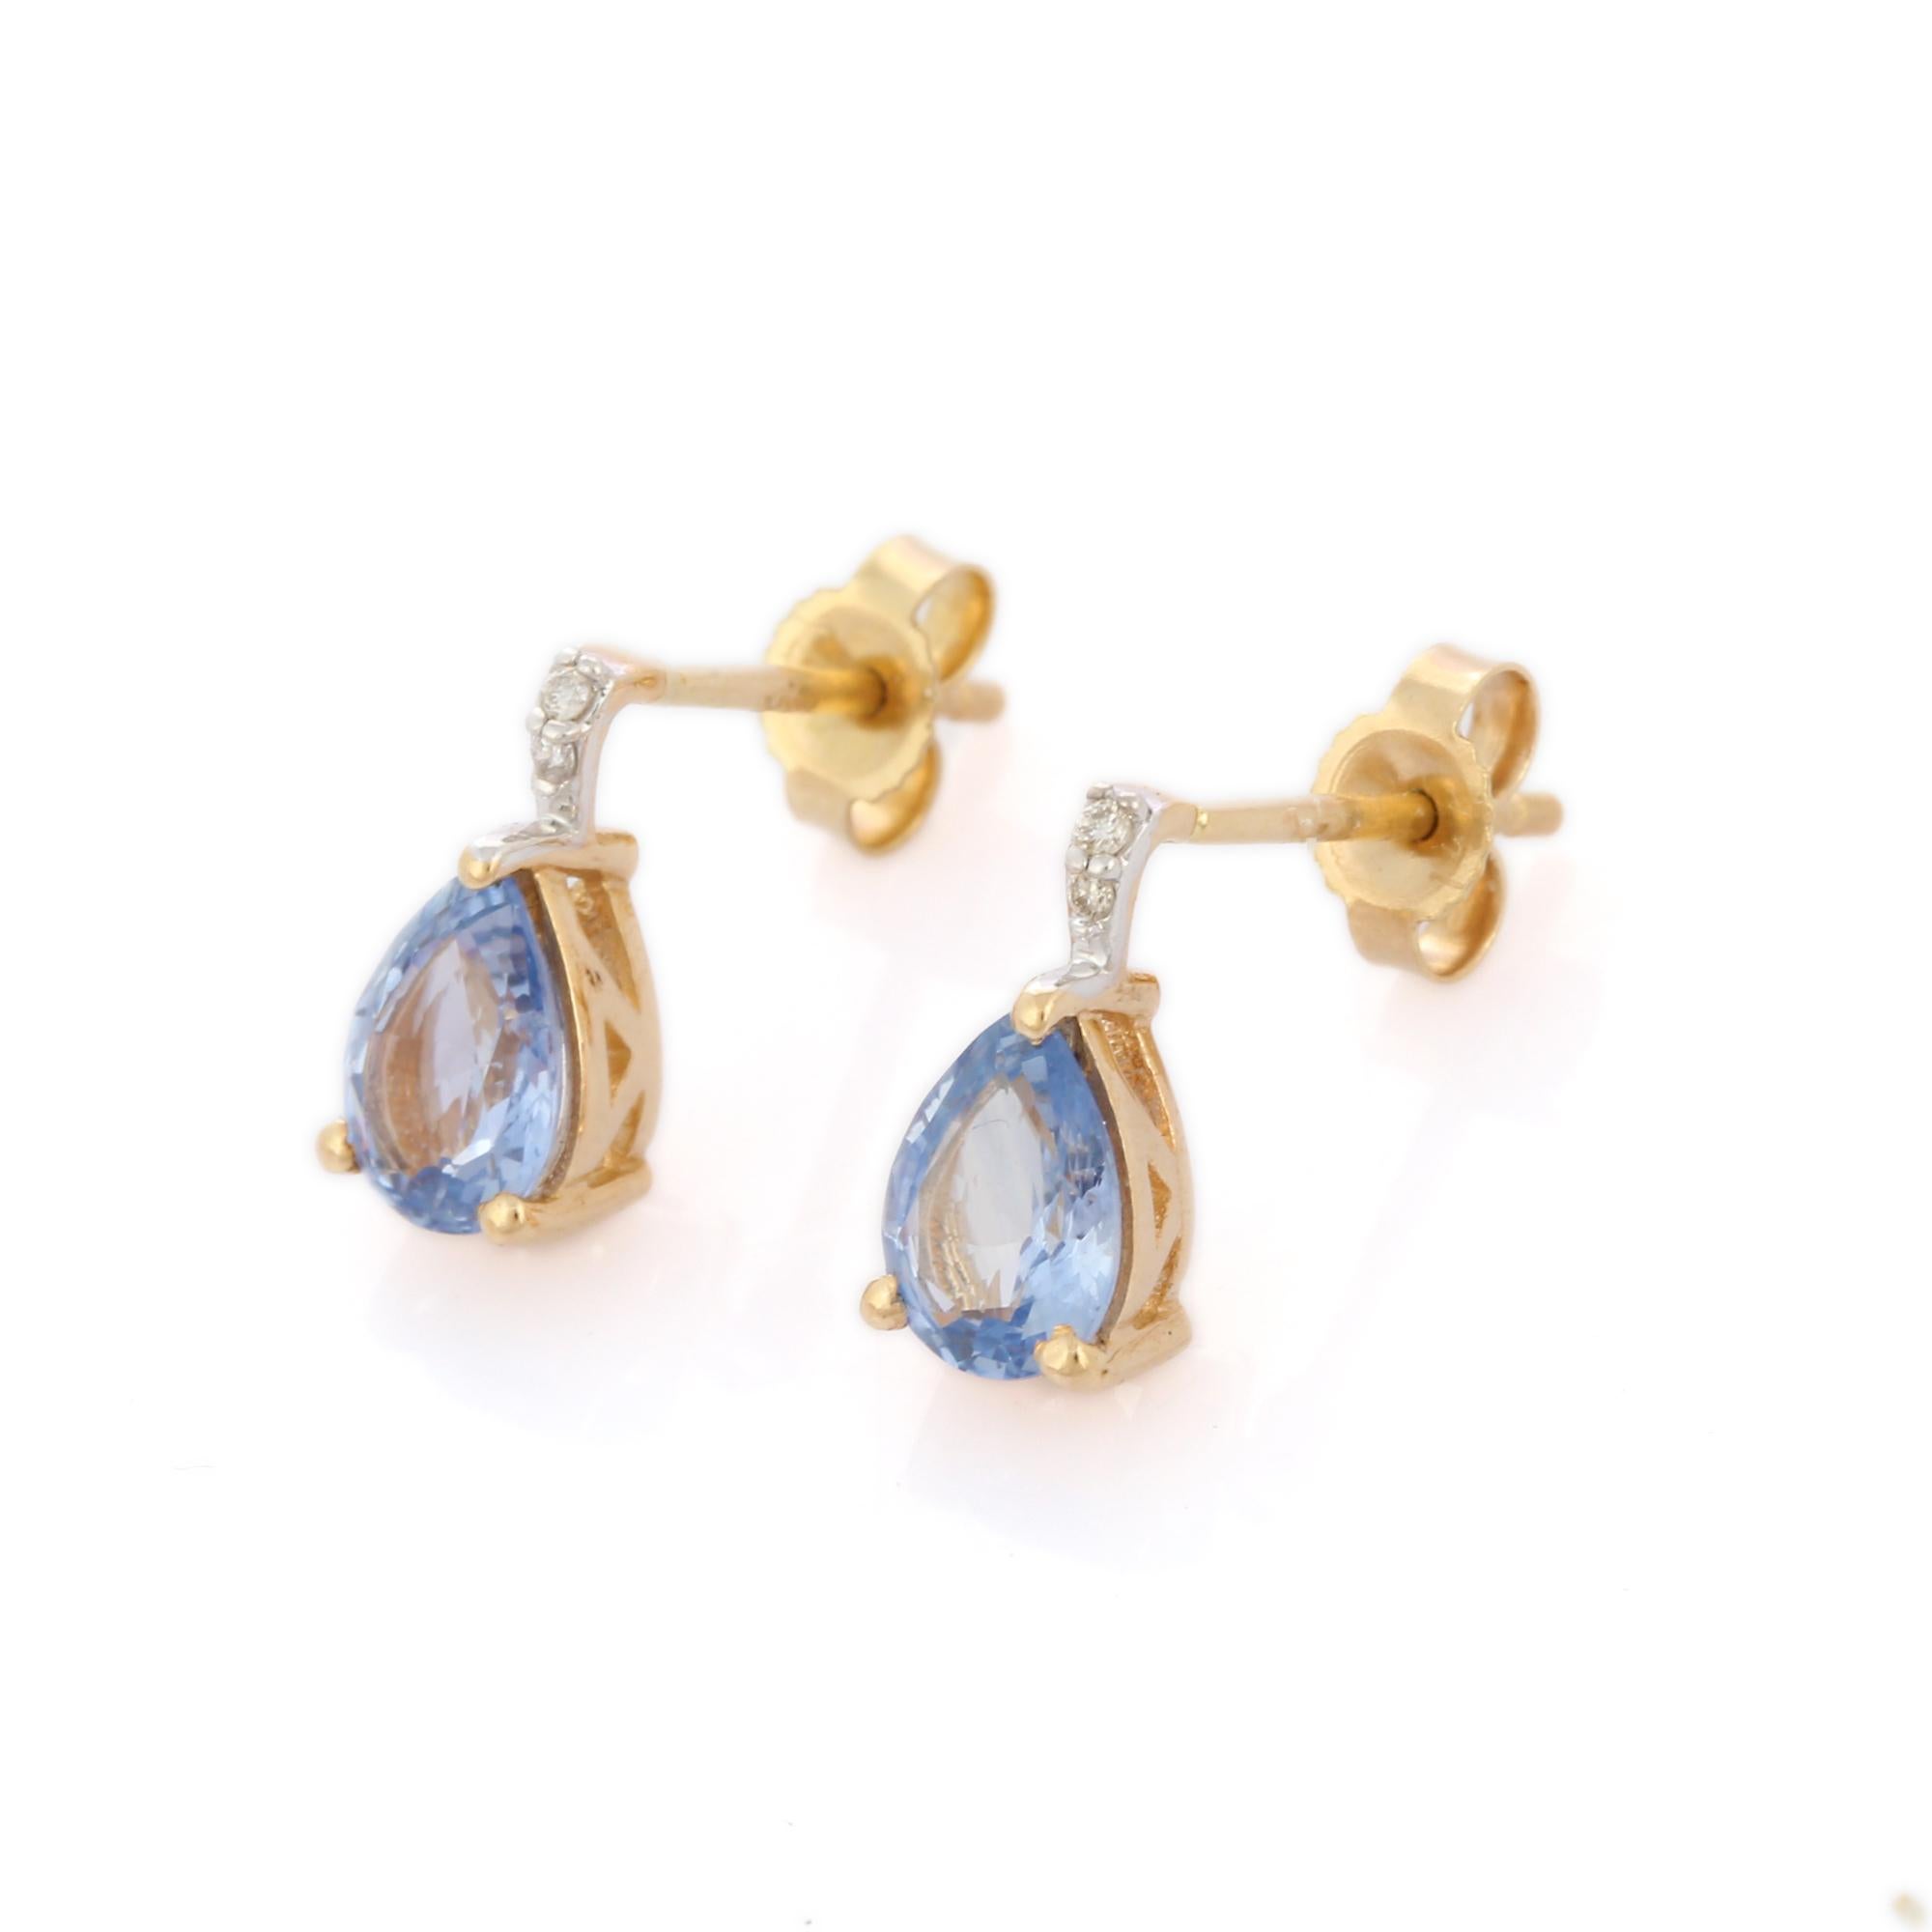 Drop earrings create a subtle beauty while showcasing the colors of the natural precious gemstones and illuminating diamonds making a statement.

Oval cut blue sapphire drop earrings in 14K gold. Embrace your look with these stunning pair of